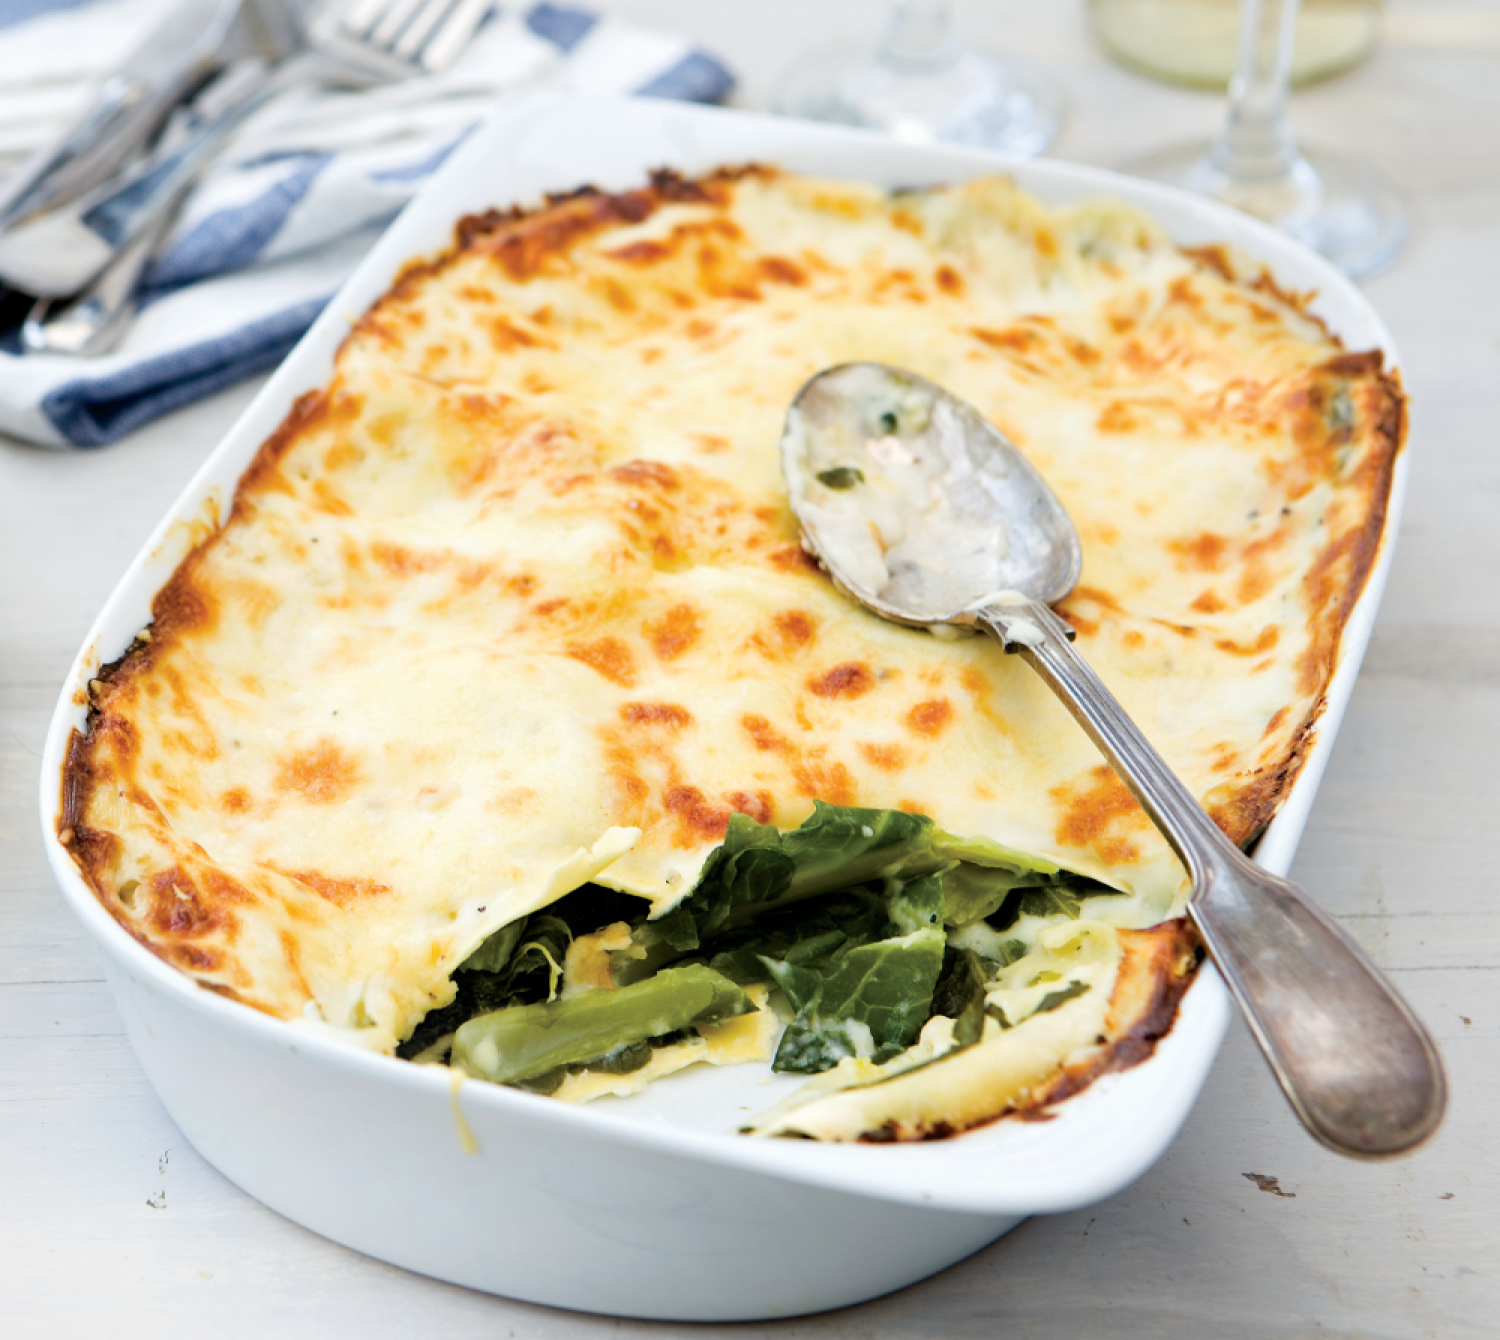 A white dish of Swiss Chard Lasagne with one portion scooped out showing the crisp golden layer of pasta on top with green chard layered with more pasta underneath in a creamy looking sauce